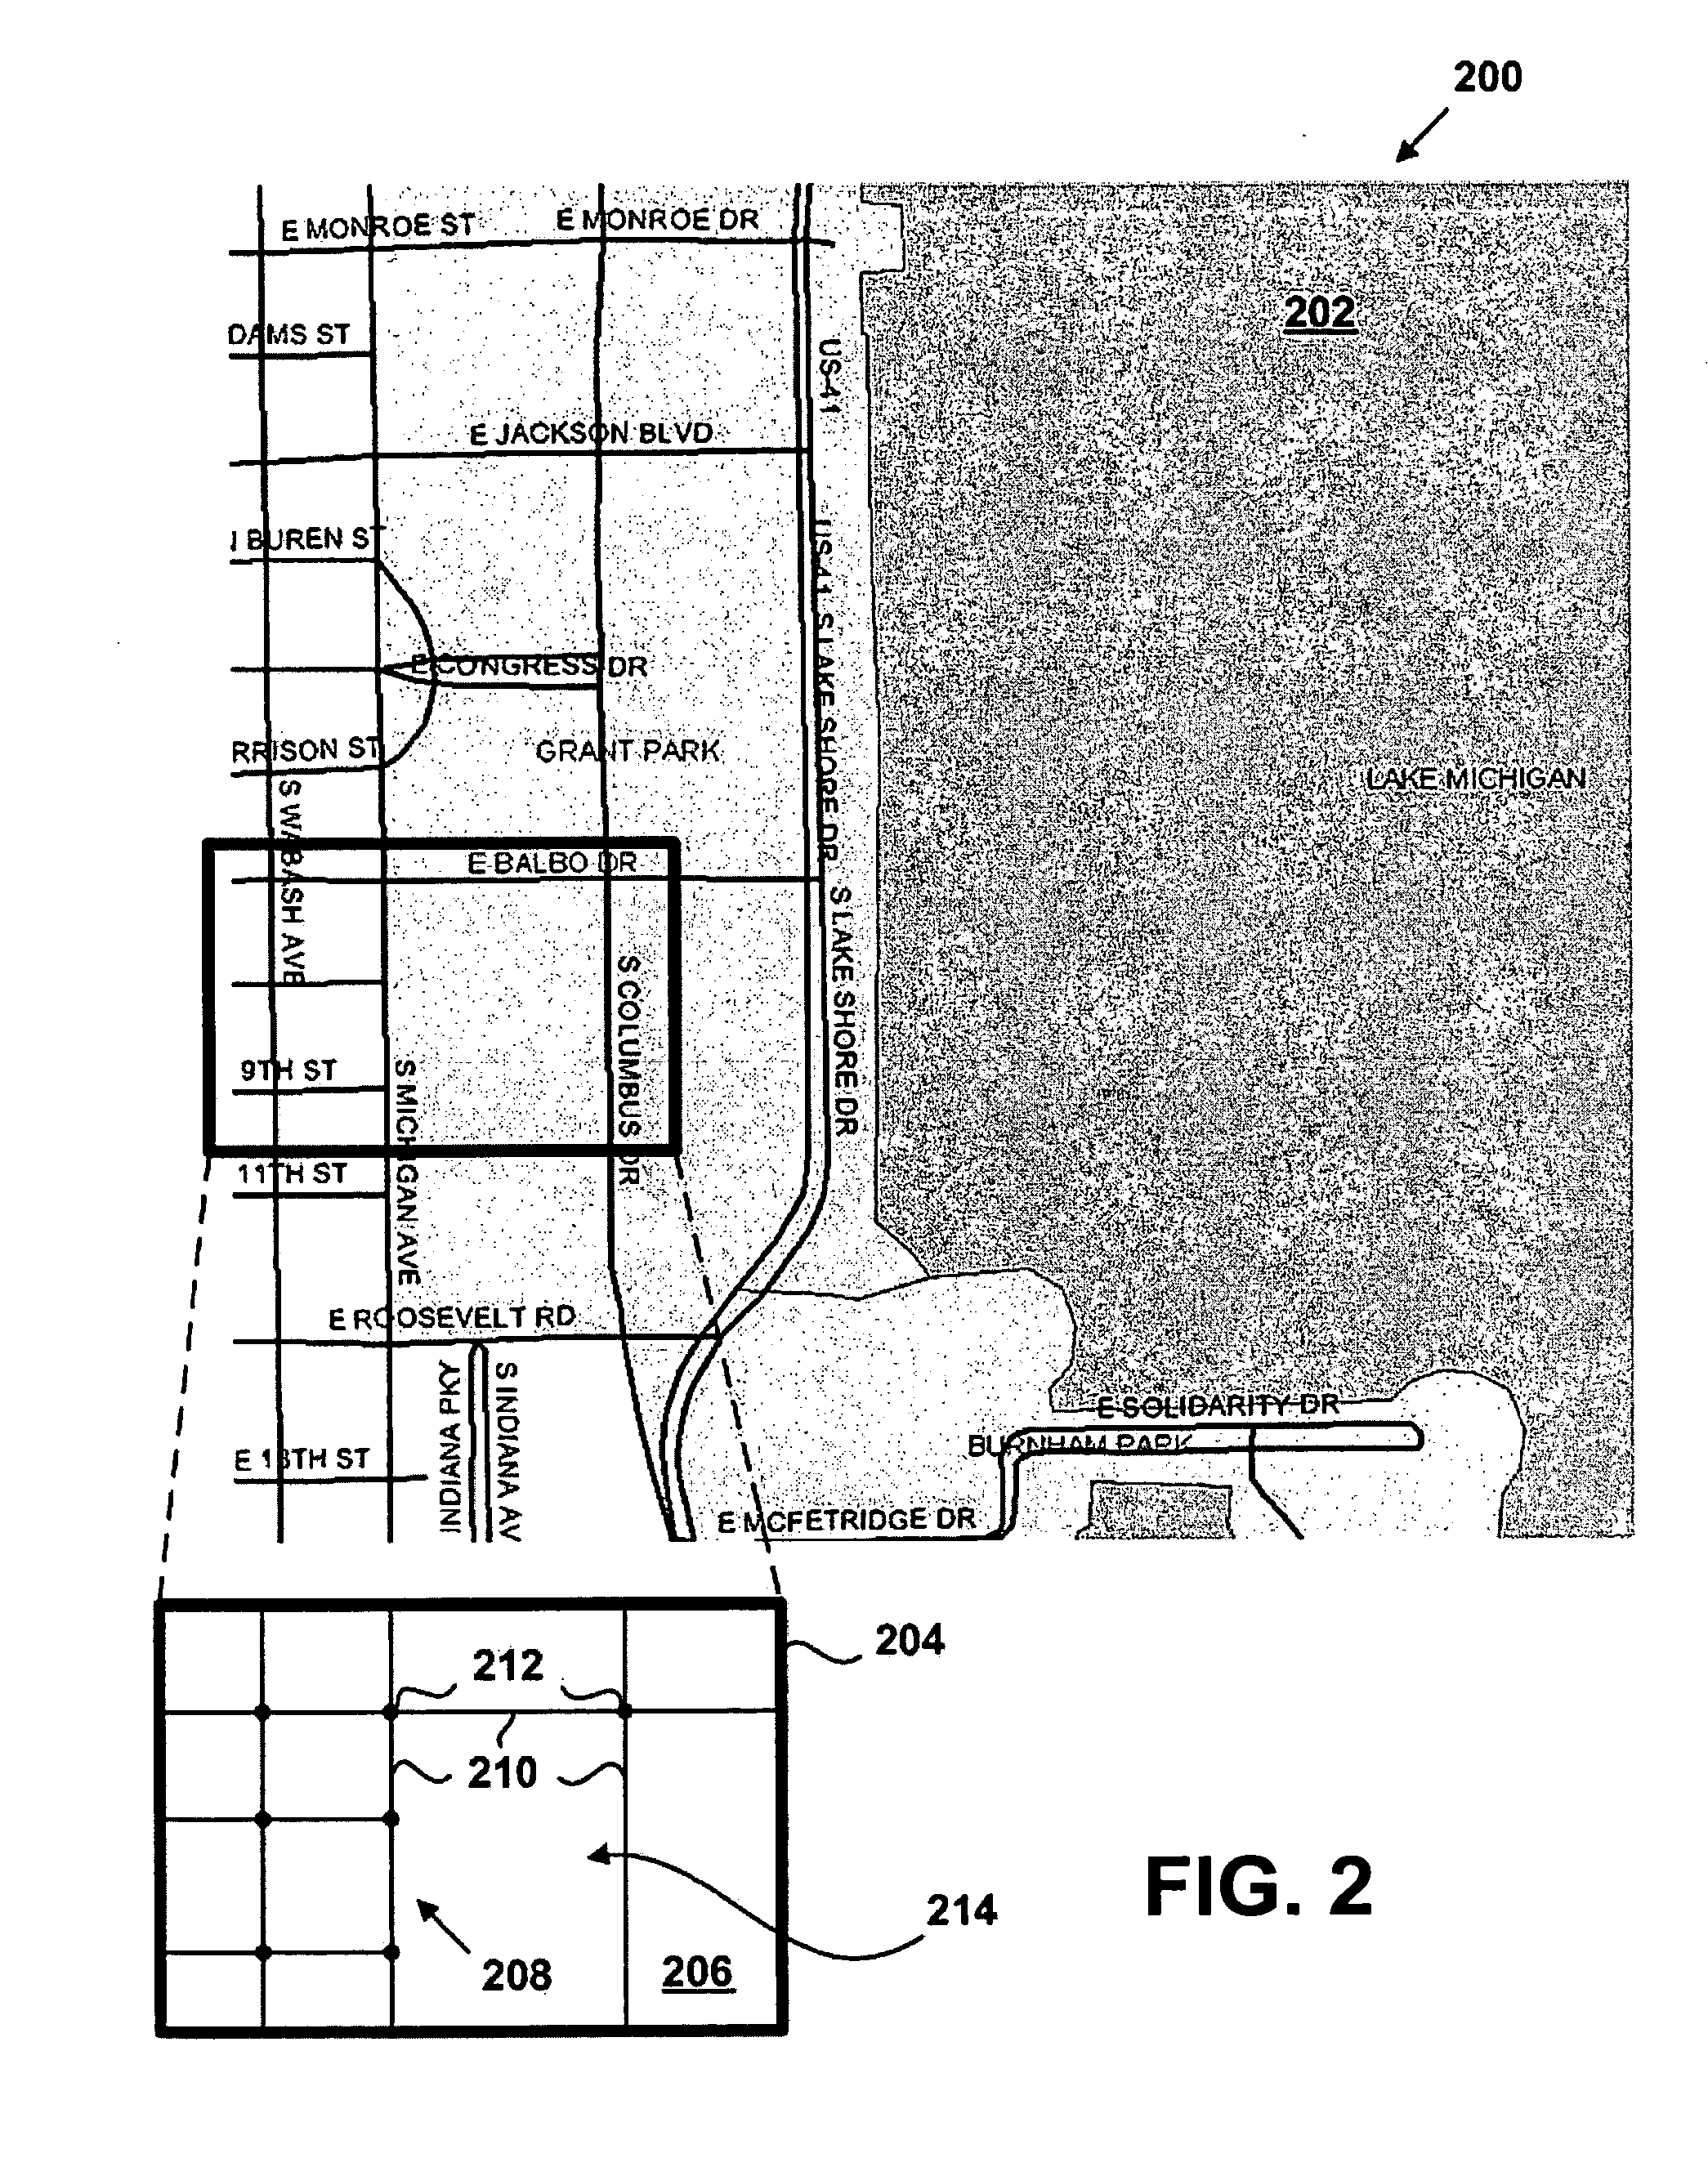 Method of operating a navigation system using images